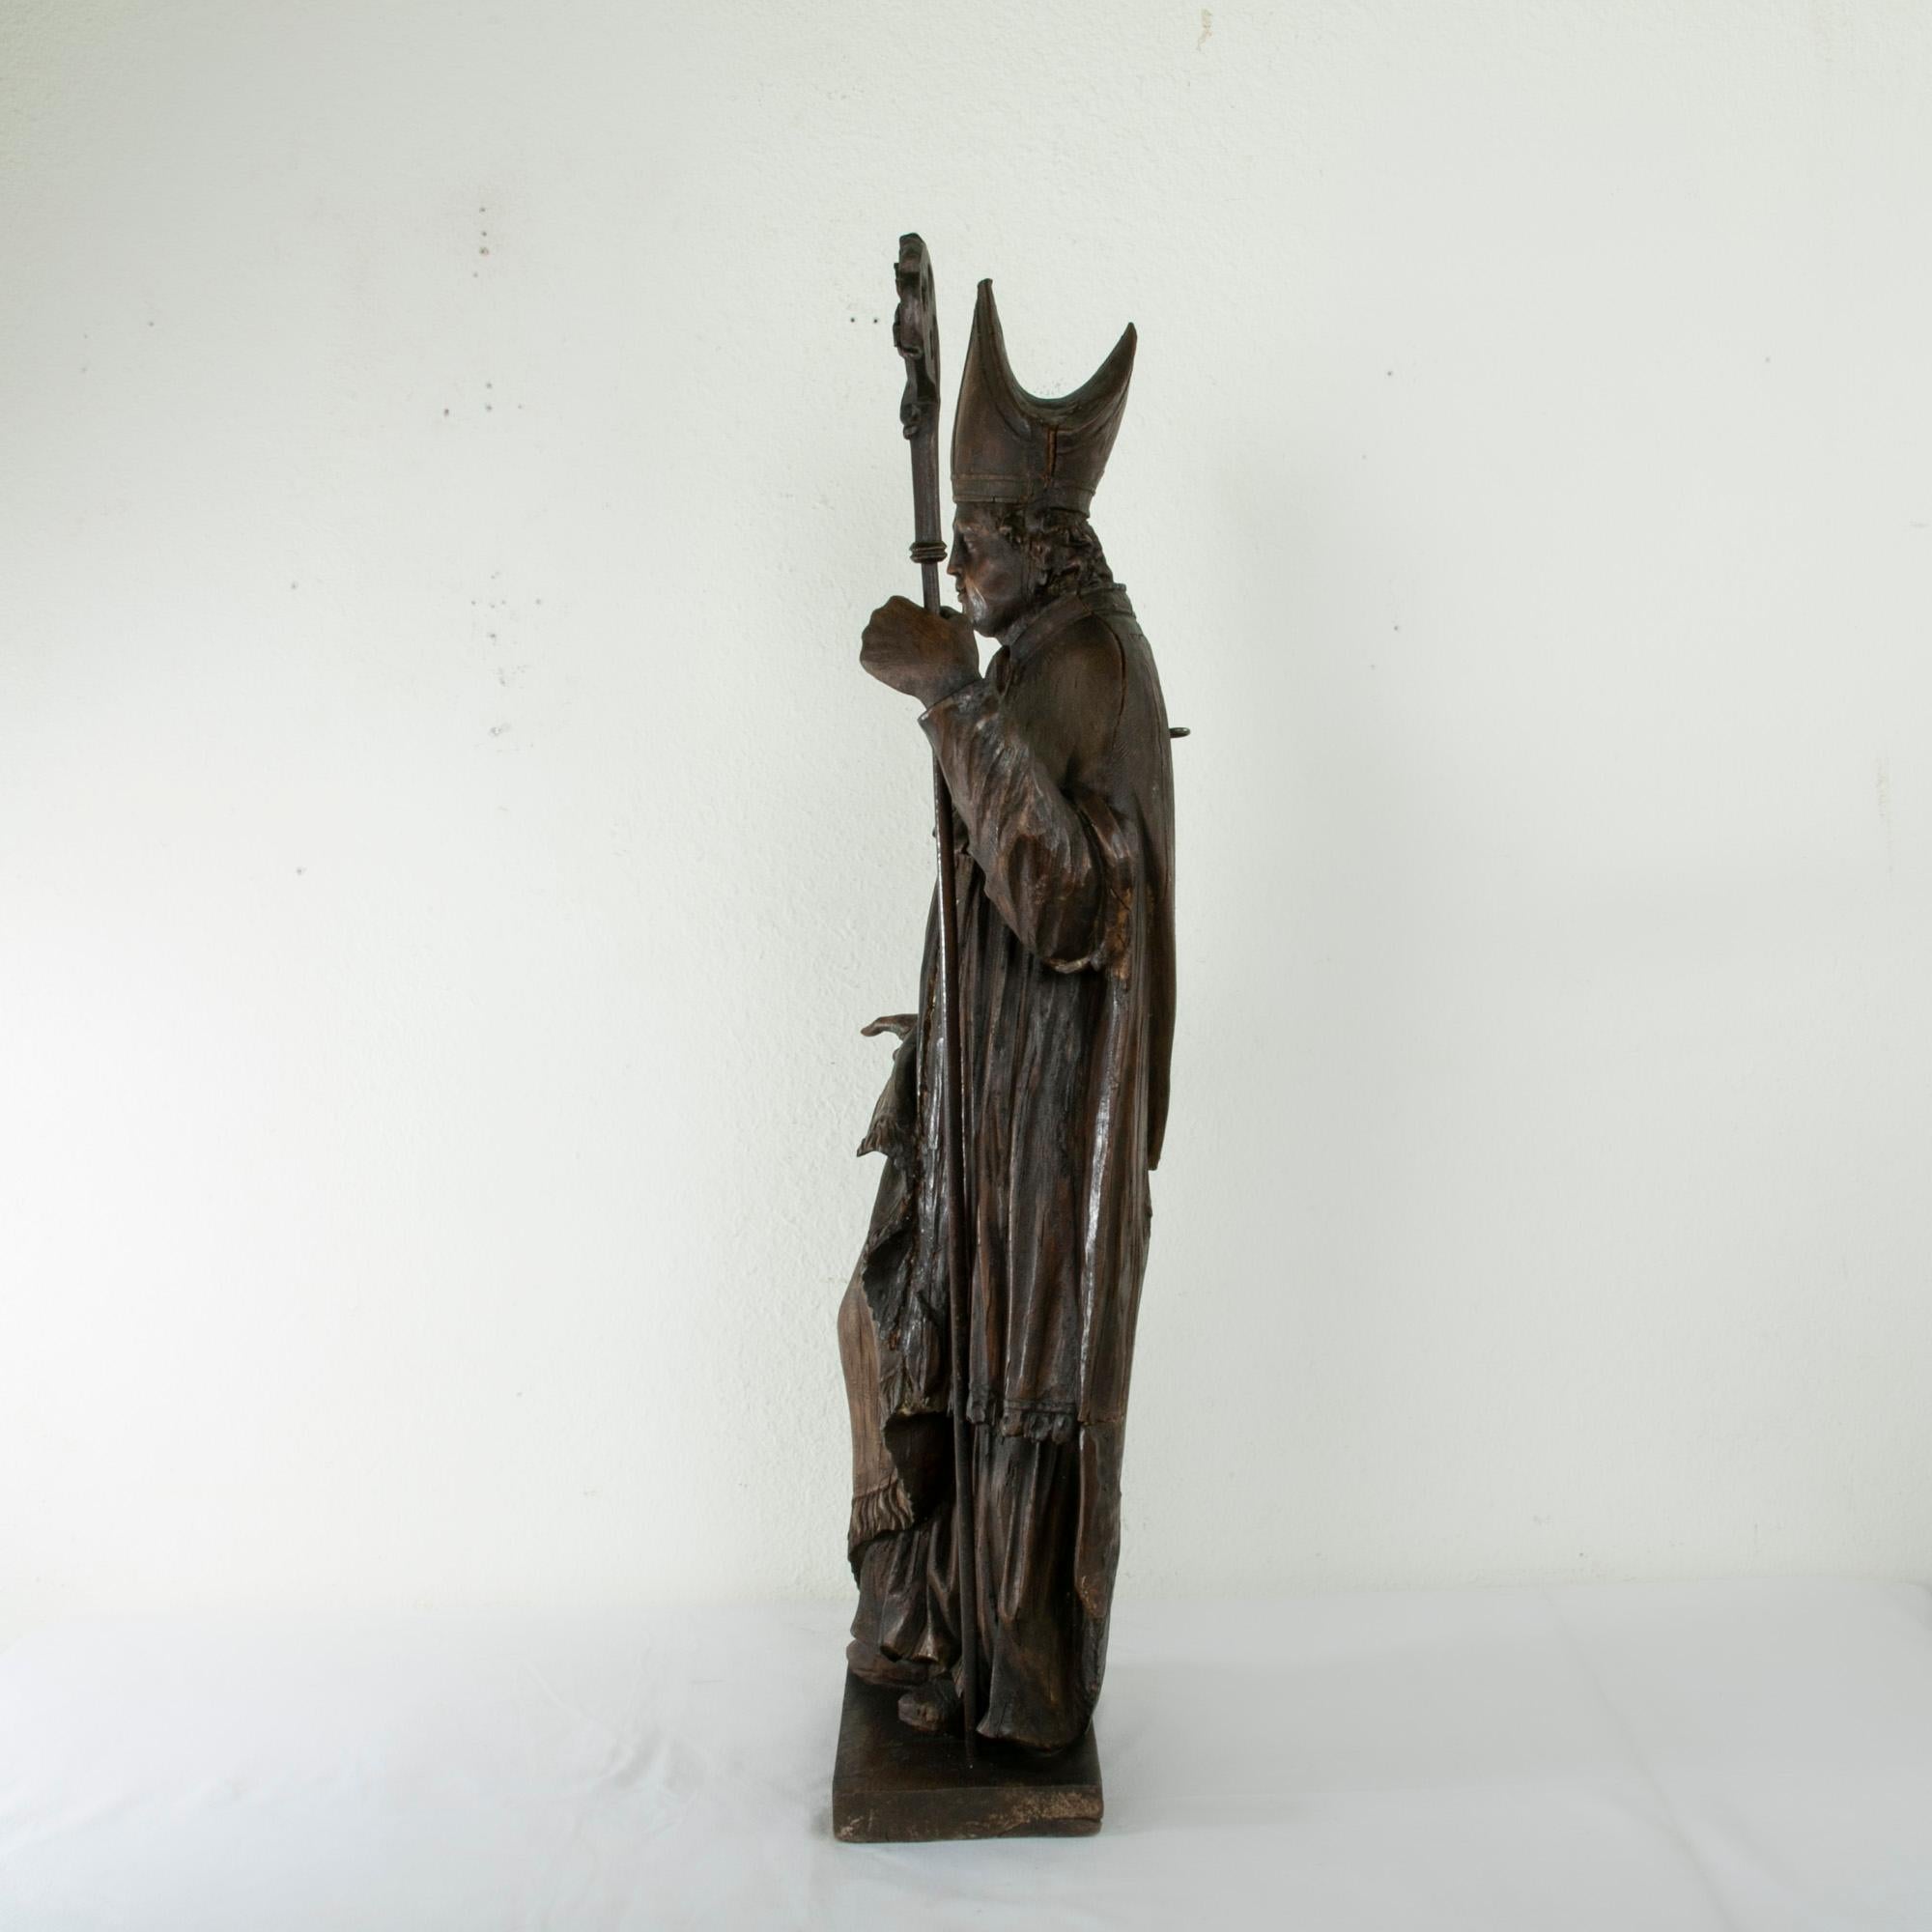 Standing at an impressive 39 inches in height this late eighteenth century French hand carved statue depicts a bishop dressed in his ecclesiastical vestments. A miter crowns his head and a chasuble or cape hangs from his shoulders and wraps around